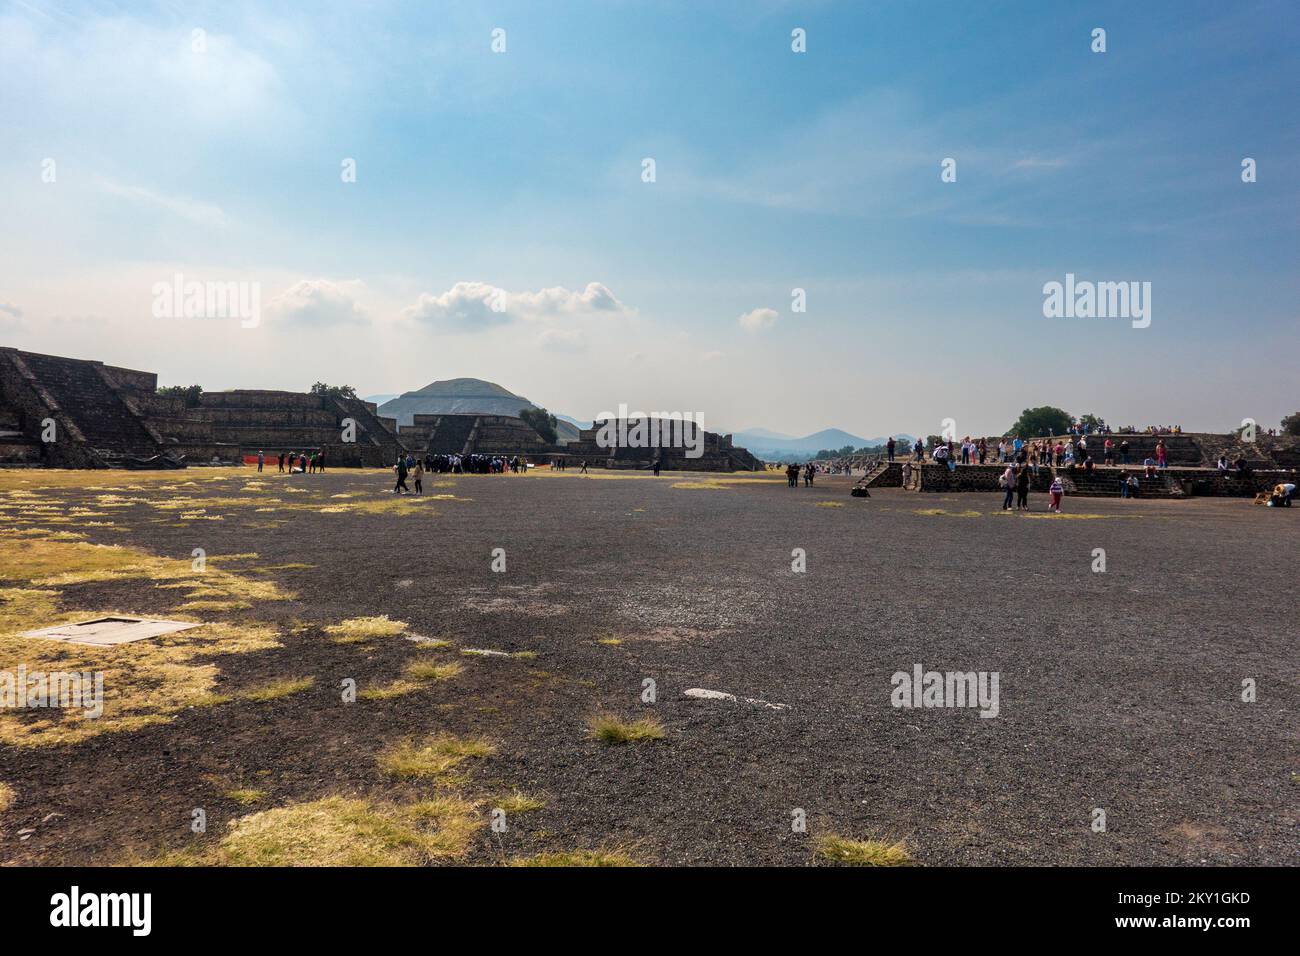 Mexico ancient city Teotihuacan, Stock Photo